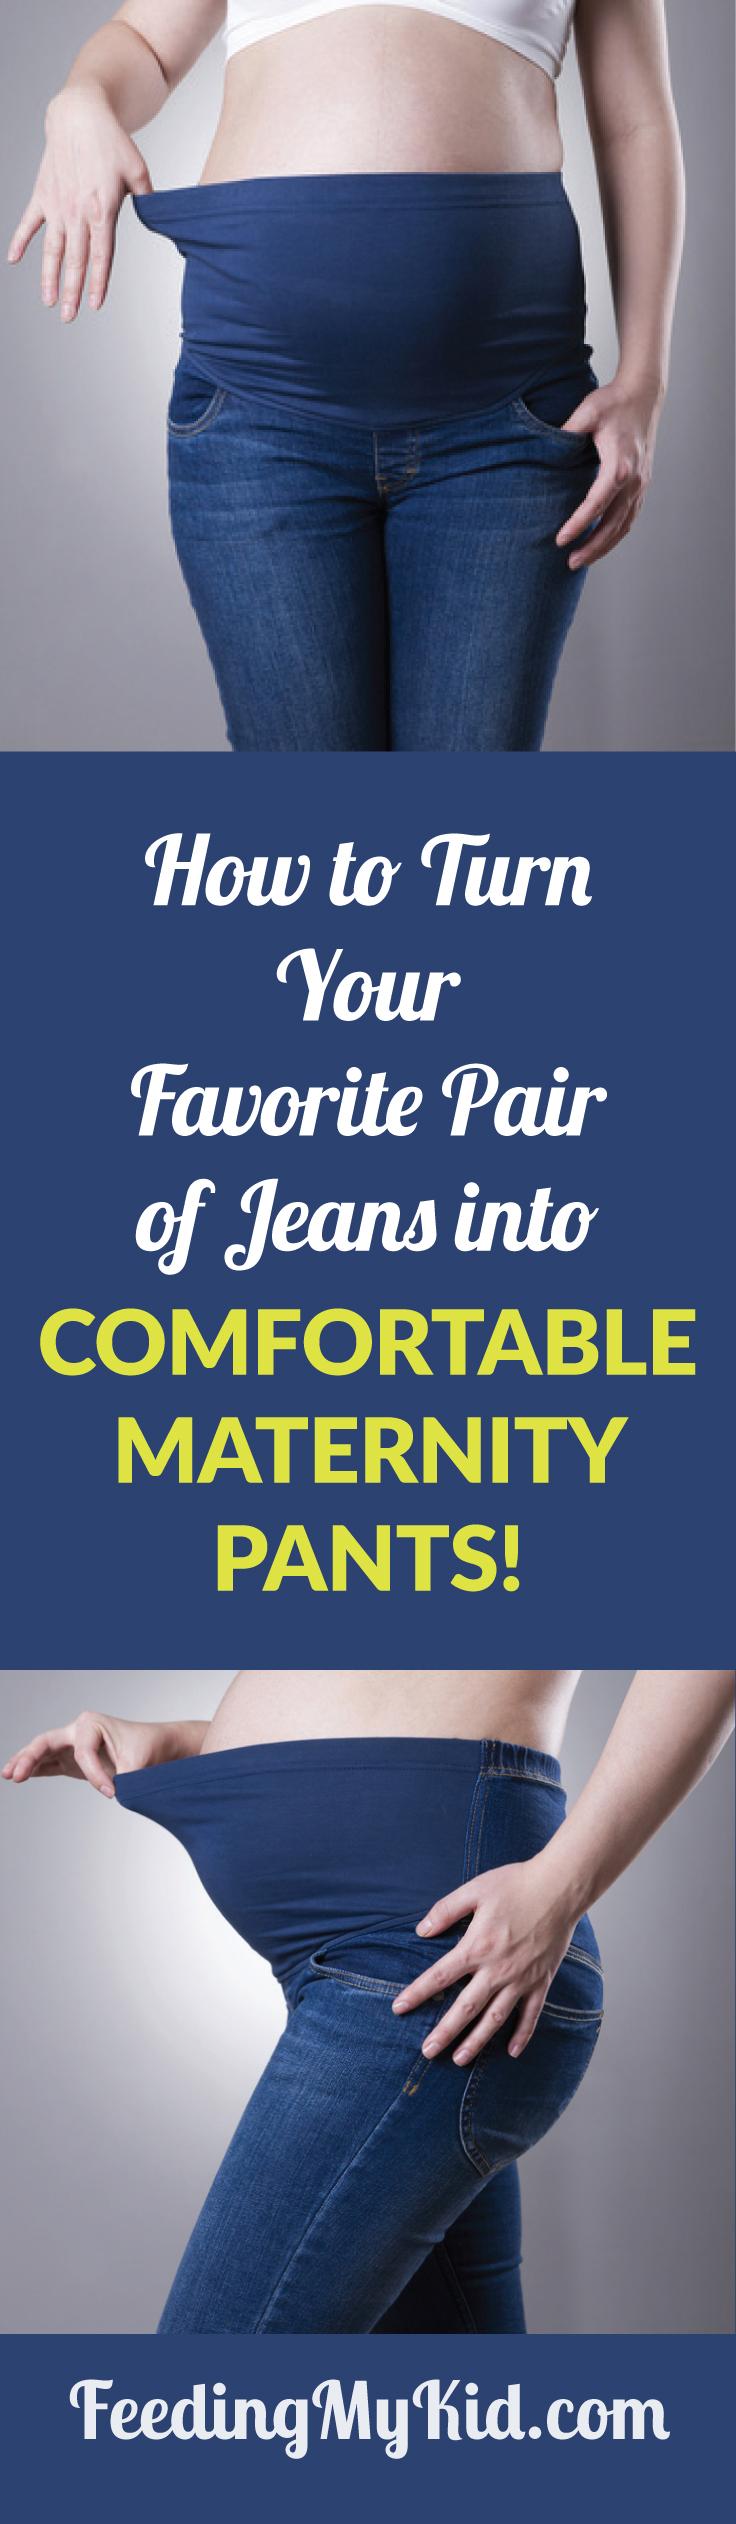 Are you having trouble finding maternity jeans? Check out this video on how to turn your favorite jeans into maternity pants.